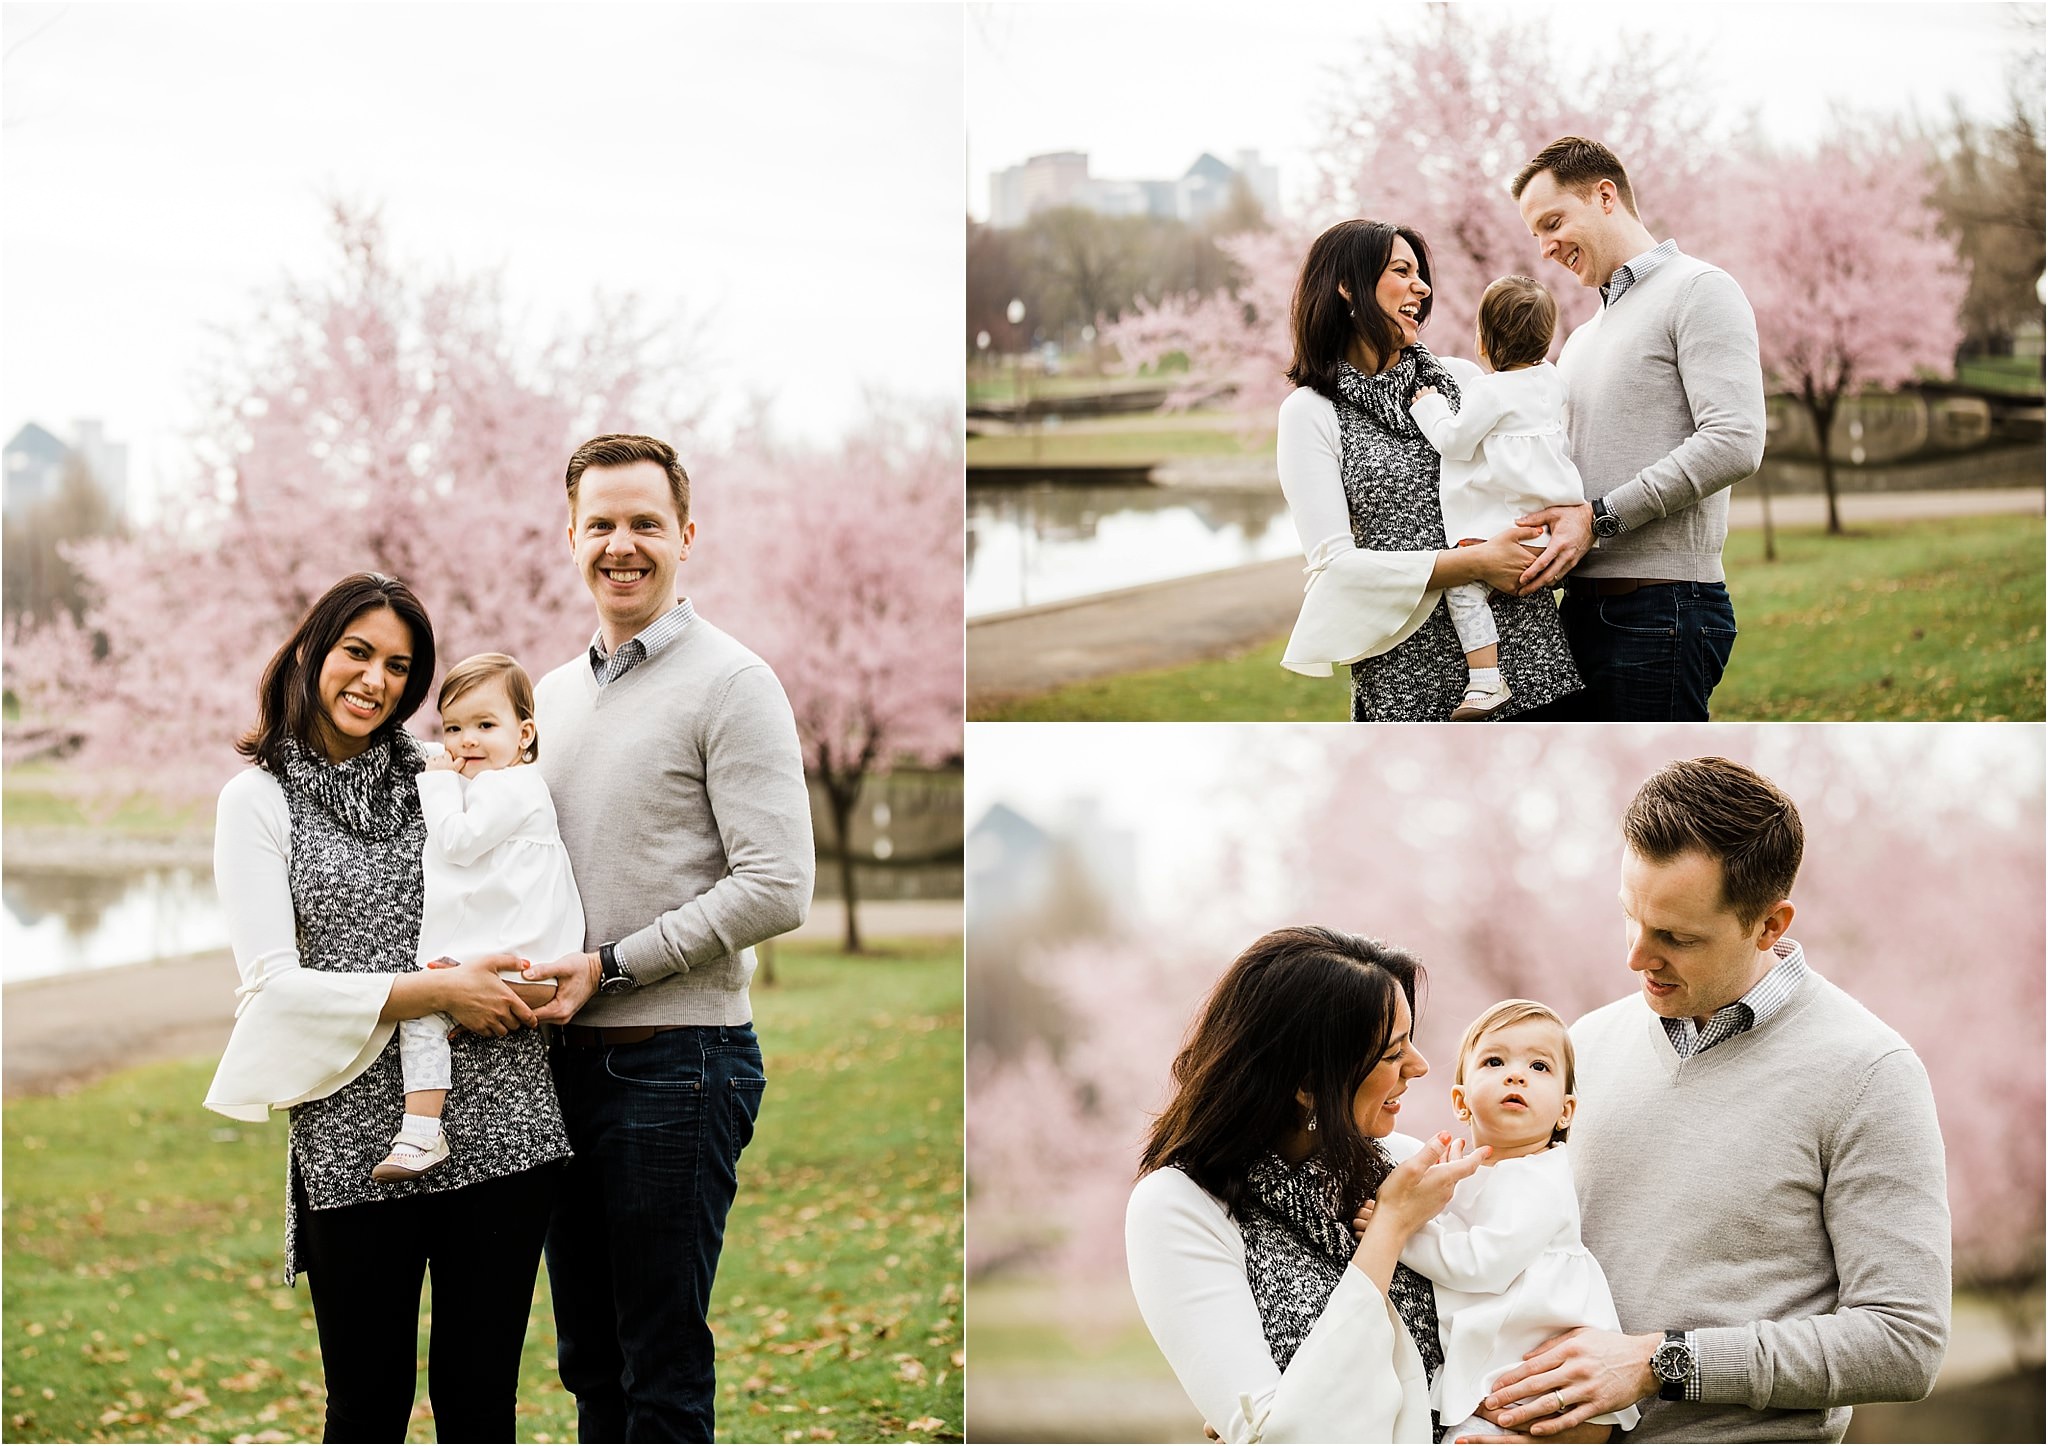 Spring Family photos at West Park in Pittsburgh